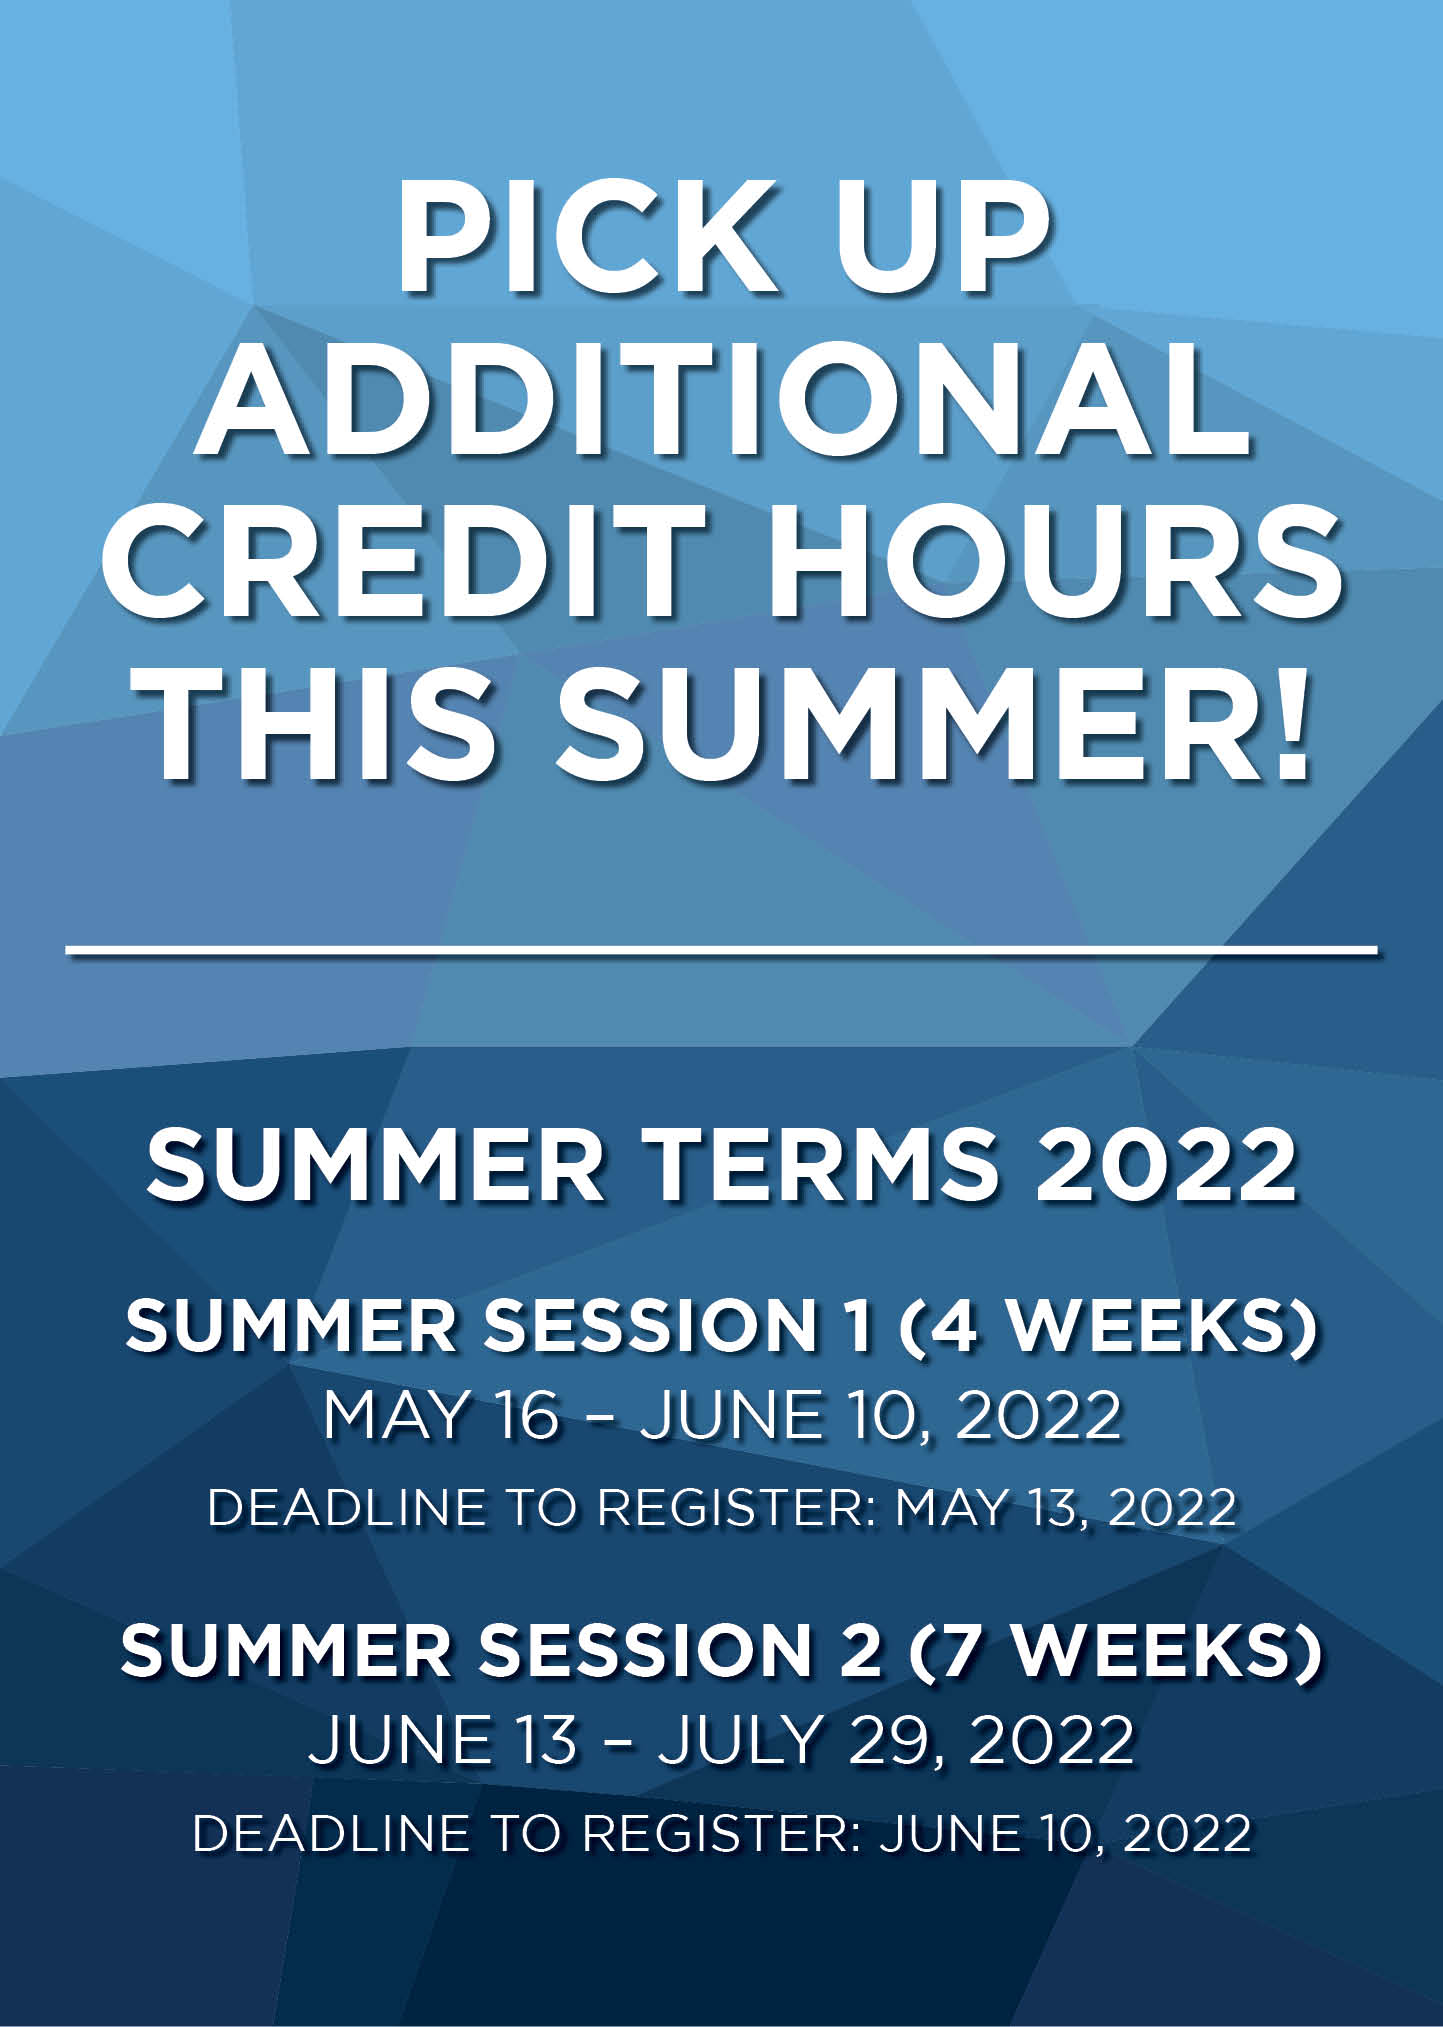 Summer Online Courses. Pick up additional Credit Hours this summer.